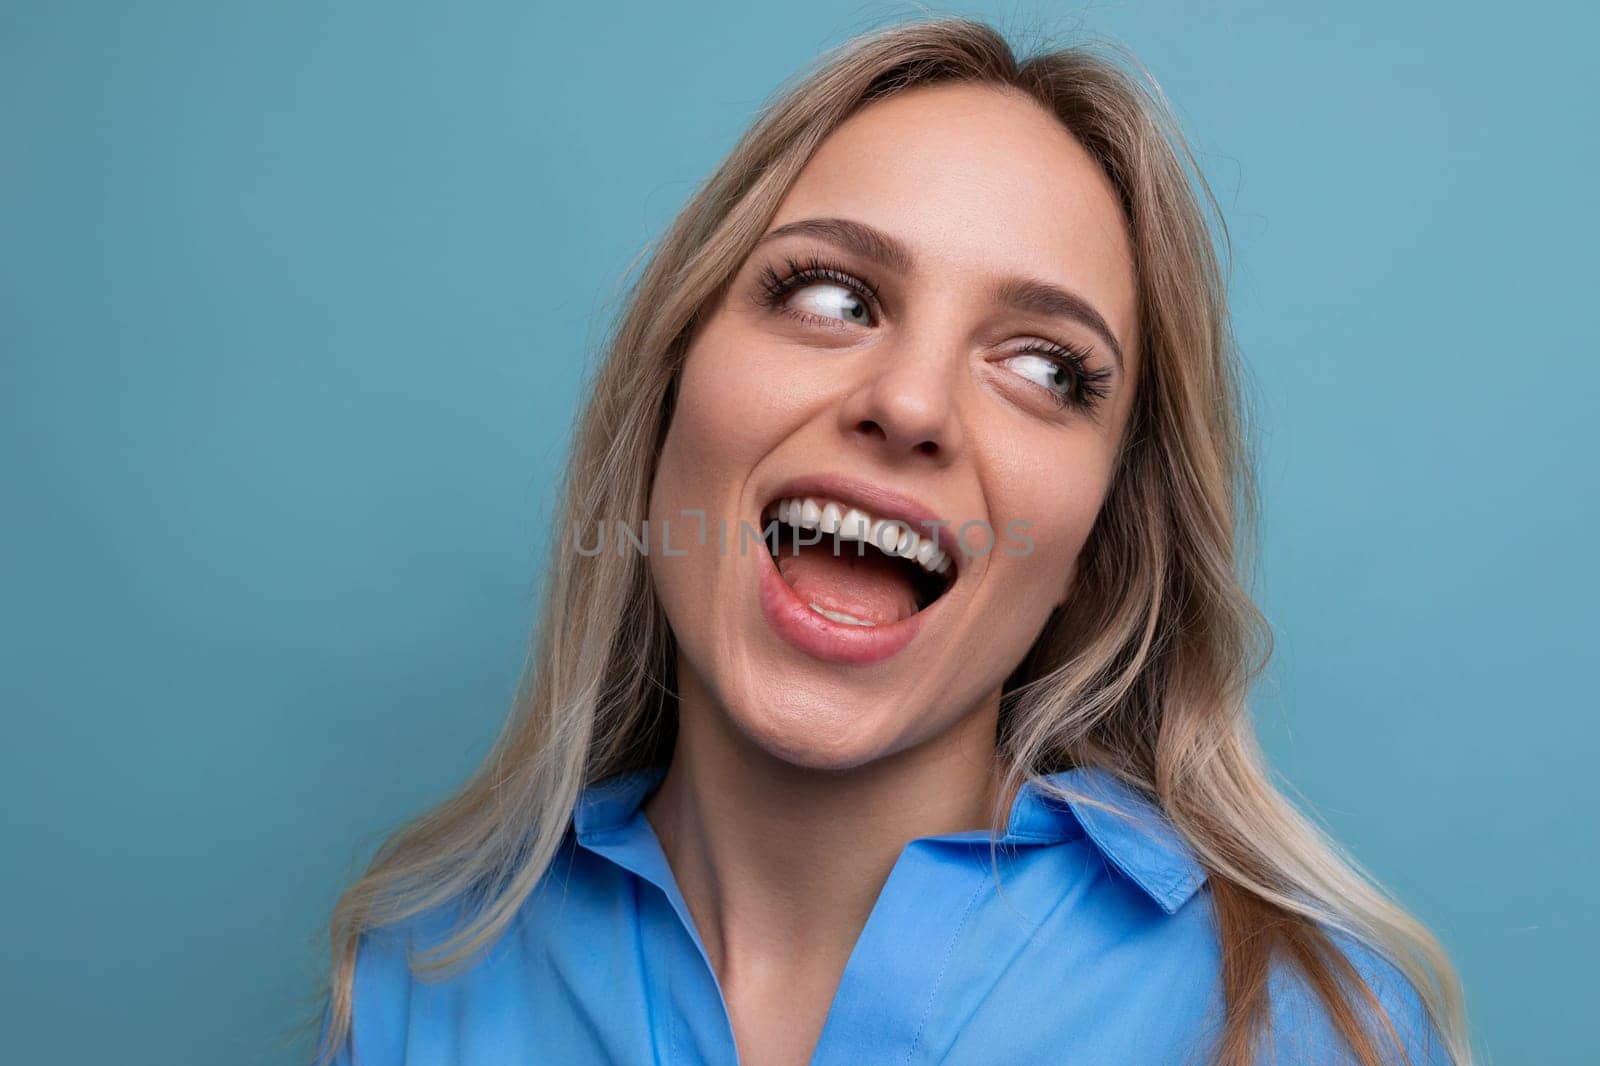 photo of an adorable young woman with a wide smile on a blue background.